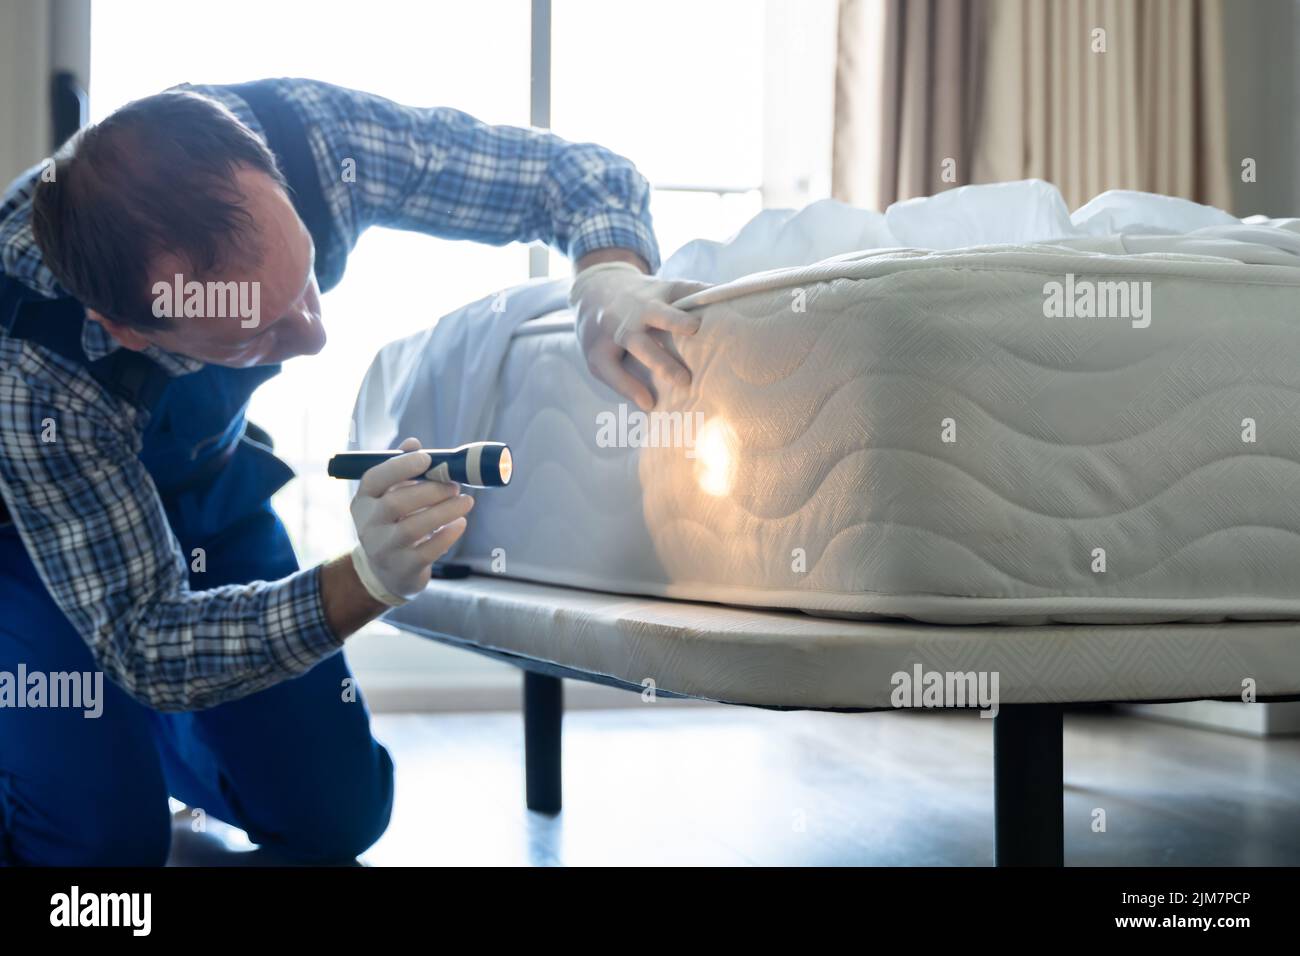 Bed Bug Infestation And Treatment Service. Bugs Extermination Stock Photo